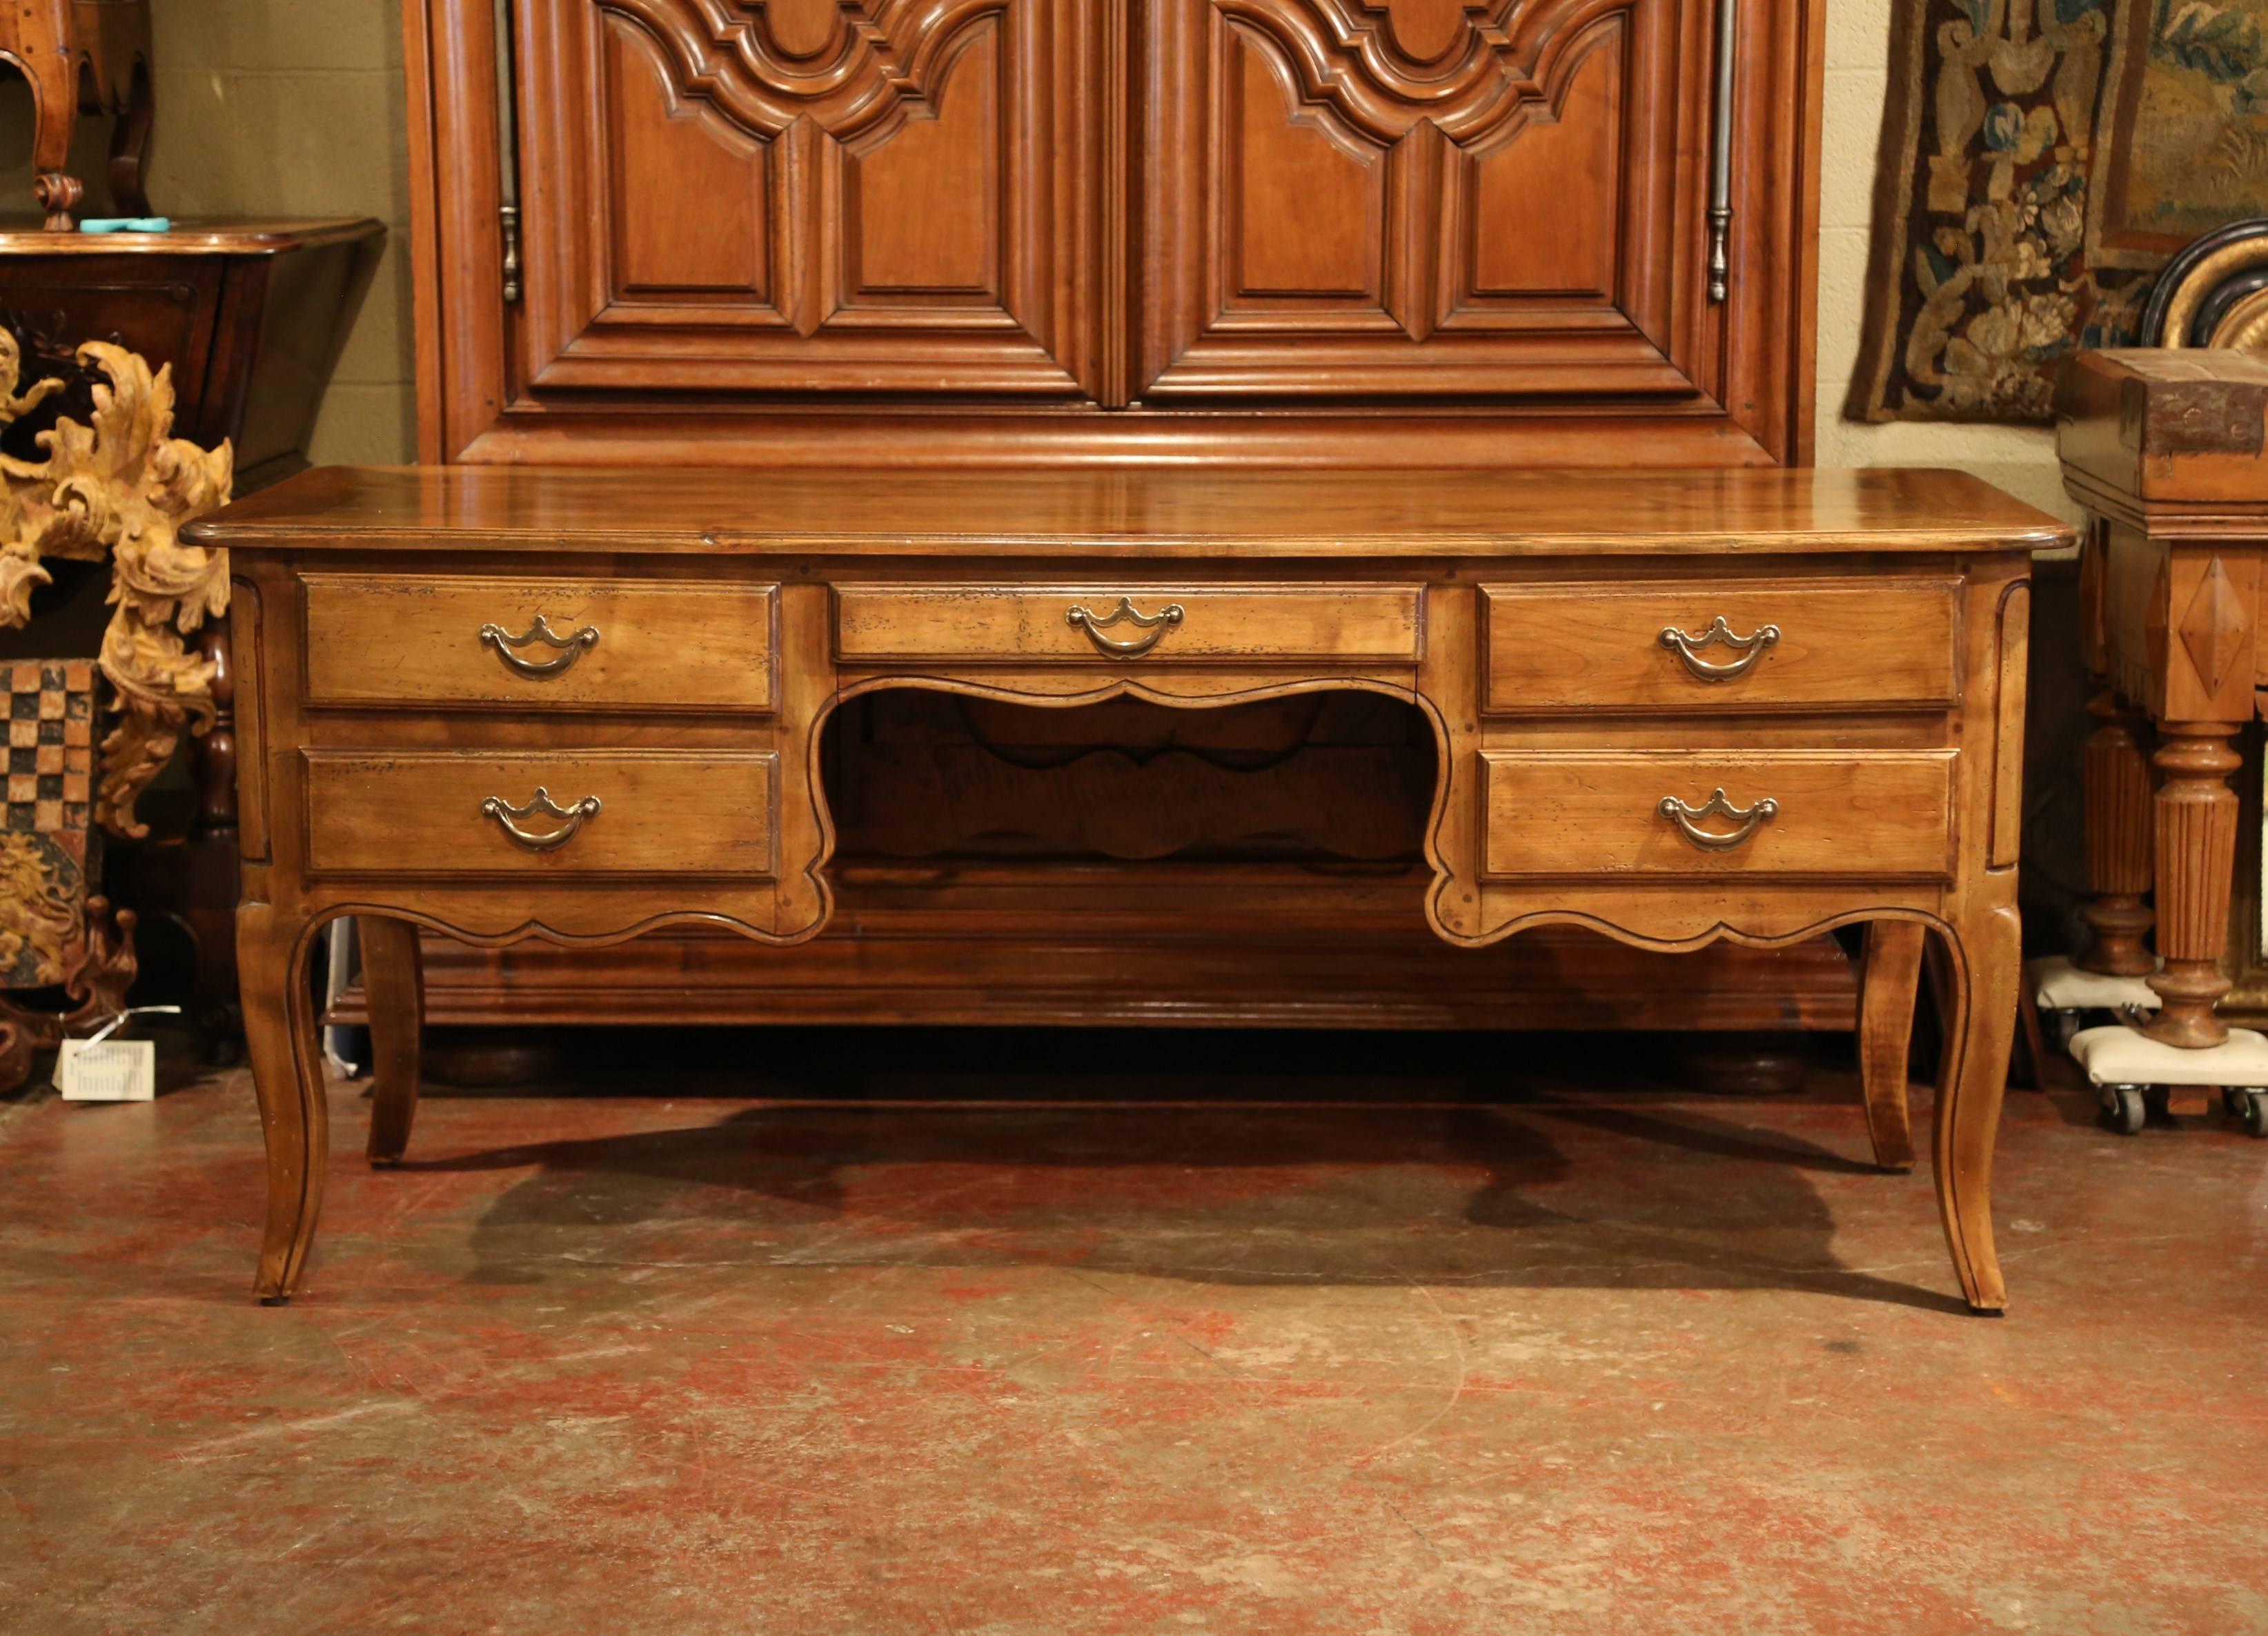 This elegant antique fruitwood desk was created in the Poitou region of France, circa 1980. Made of old cherry timber, the large writing table sits on four cabriole legs and is shaped all the way around; the desk has five drawers with patinated